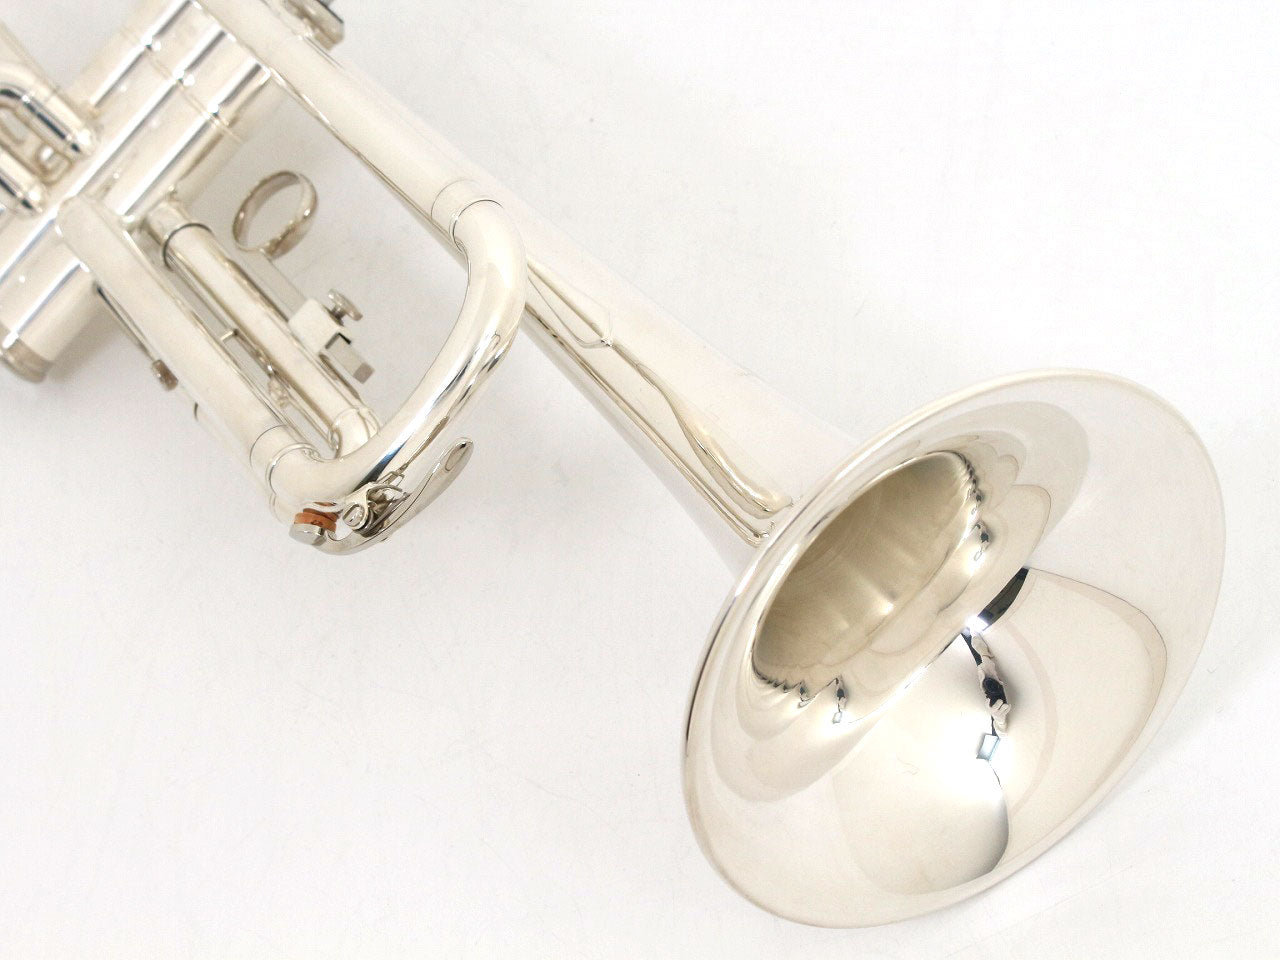 [SN 937040] USED YAMAHA / Trumpet YTR-1335S Silver plated finish [20]